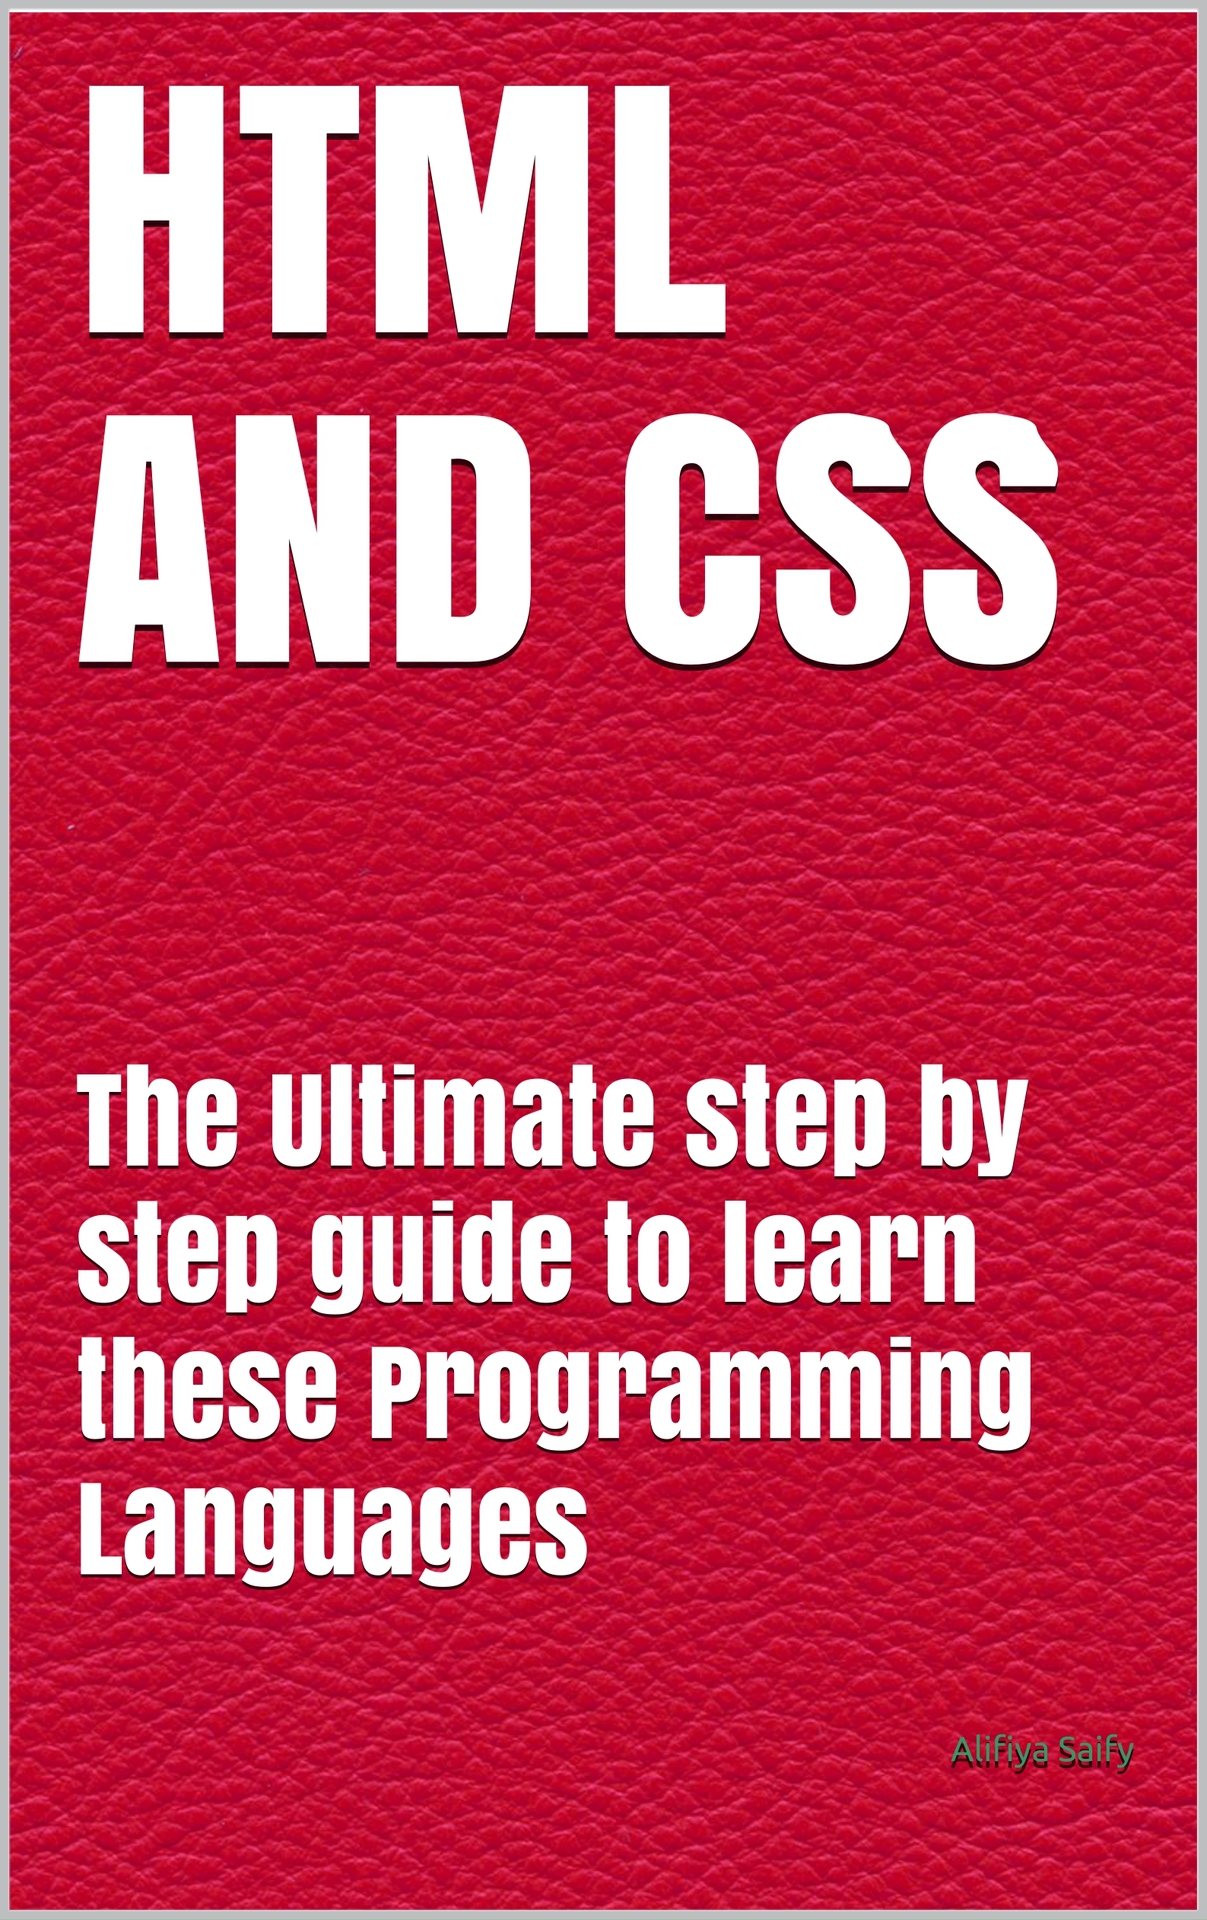 HTML AND CSS: The Ultimate step by step guide to learn these Programming Languages